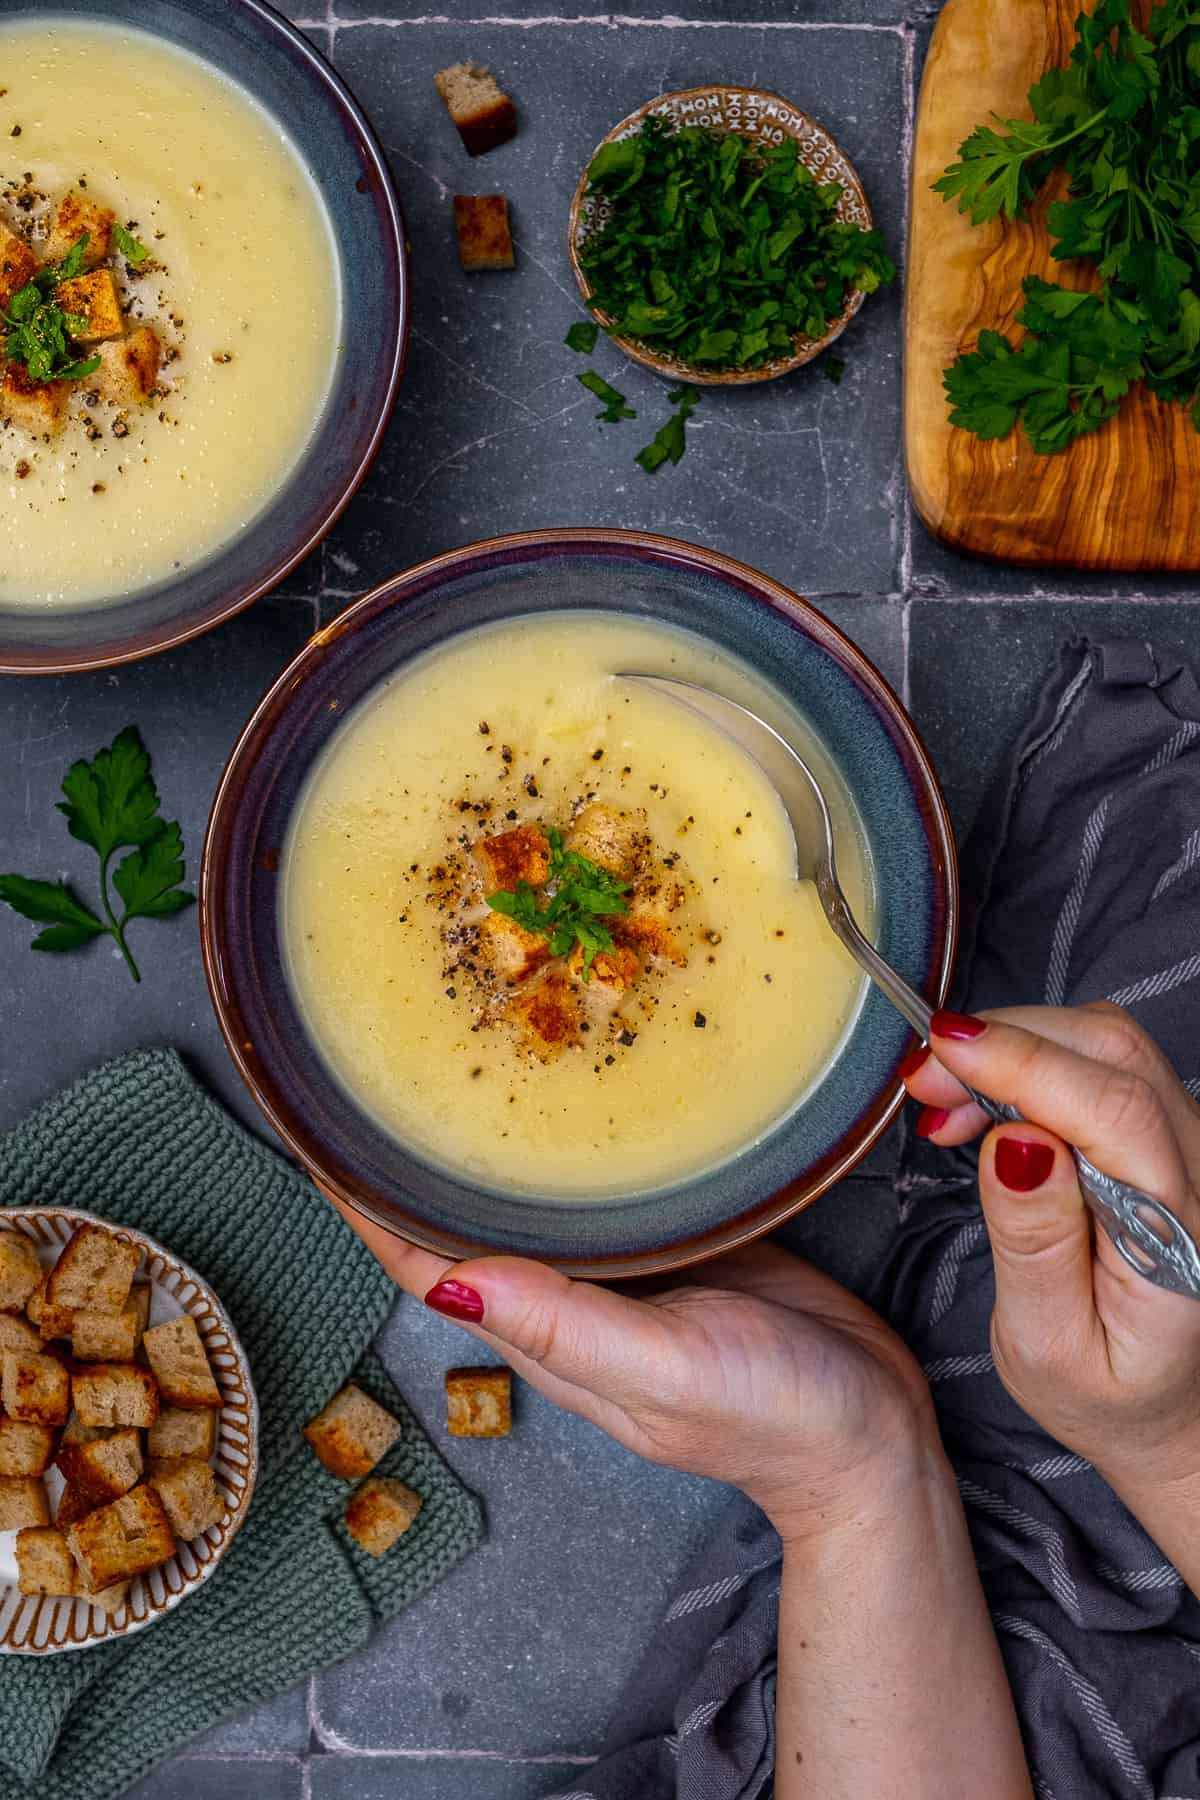 Woman hands holding a bowl of Jerusalem artichoke soup and a spoon, another bowl of soup and croutons on the side.